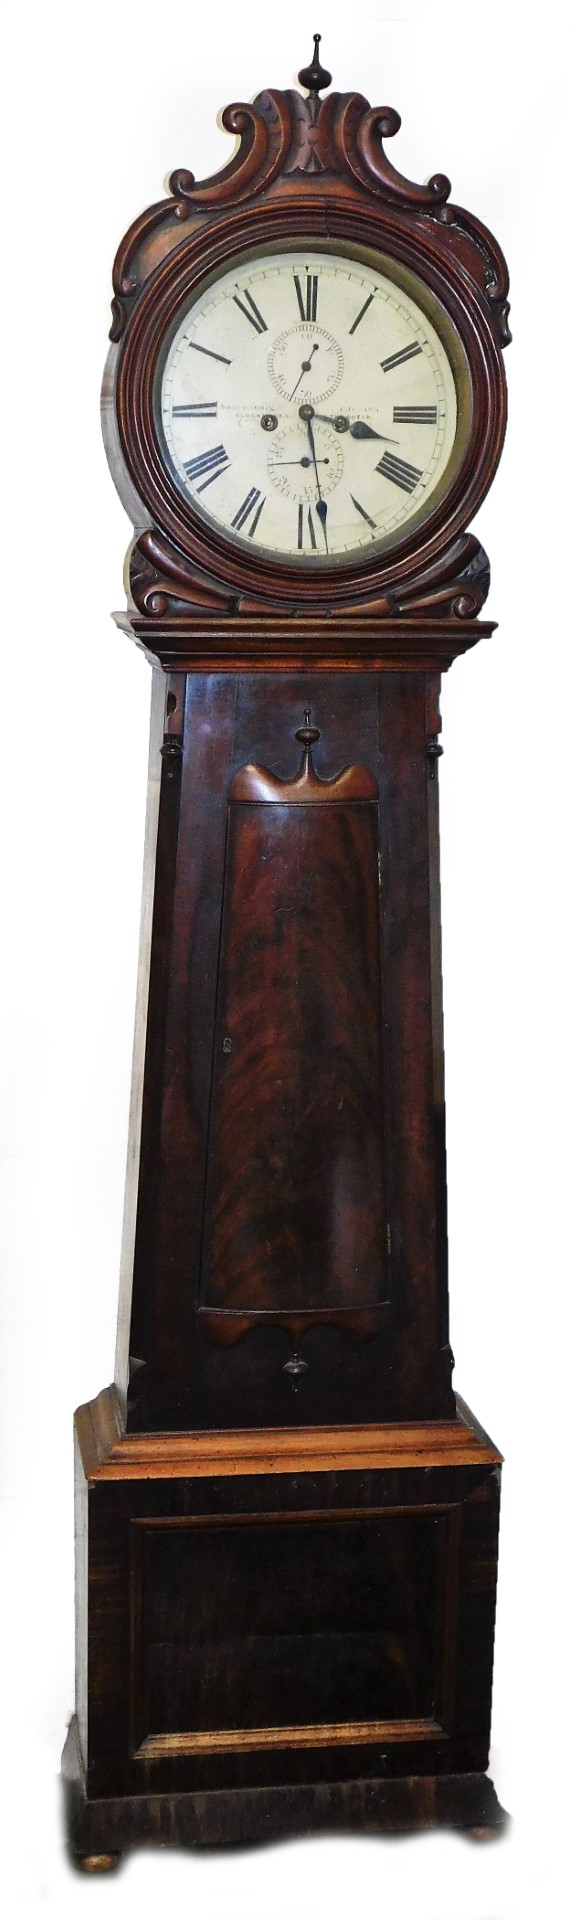 William Dobbie, Falkirk. A 19thC Scottish mahogany drumhead longcase clock, with a carved scroll - Image 2 of 5